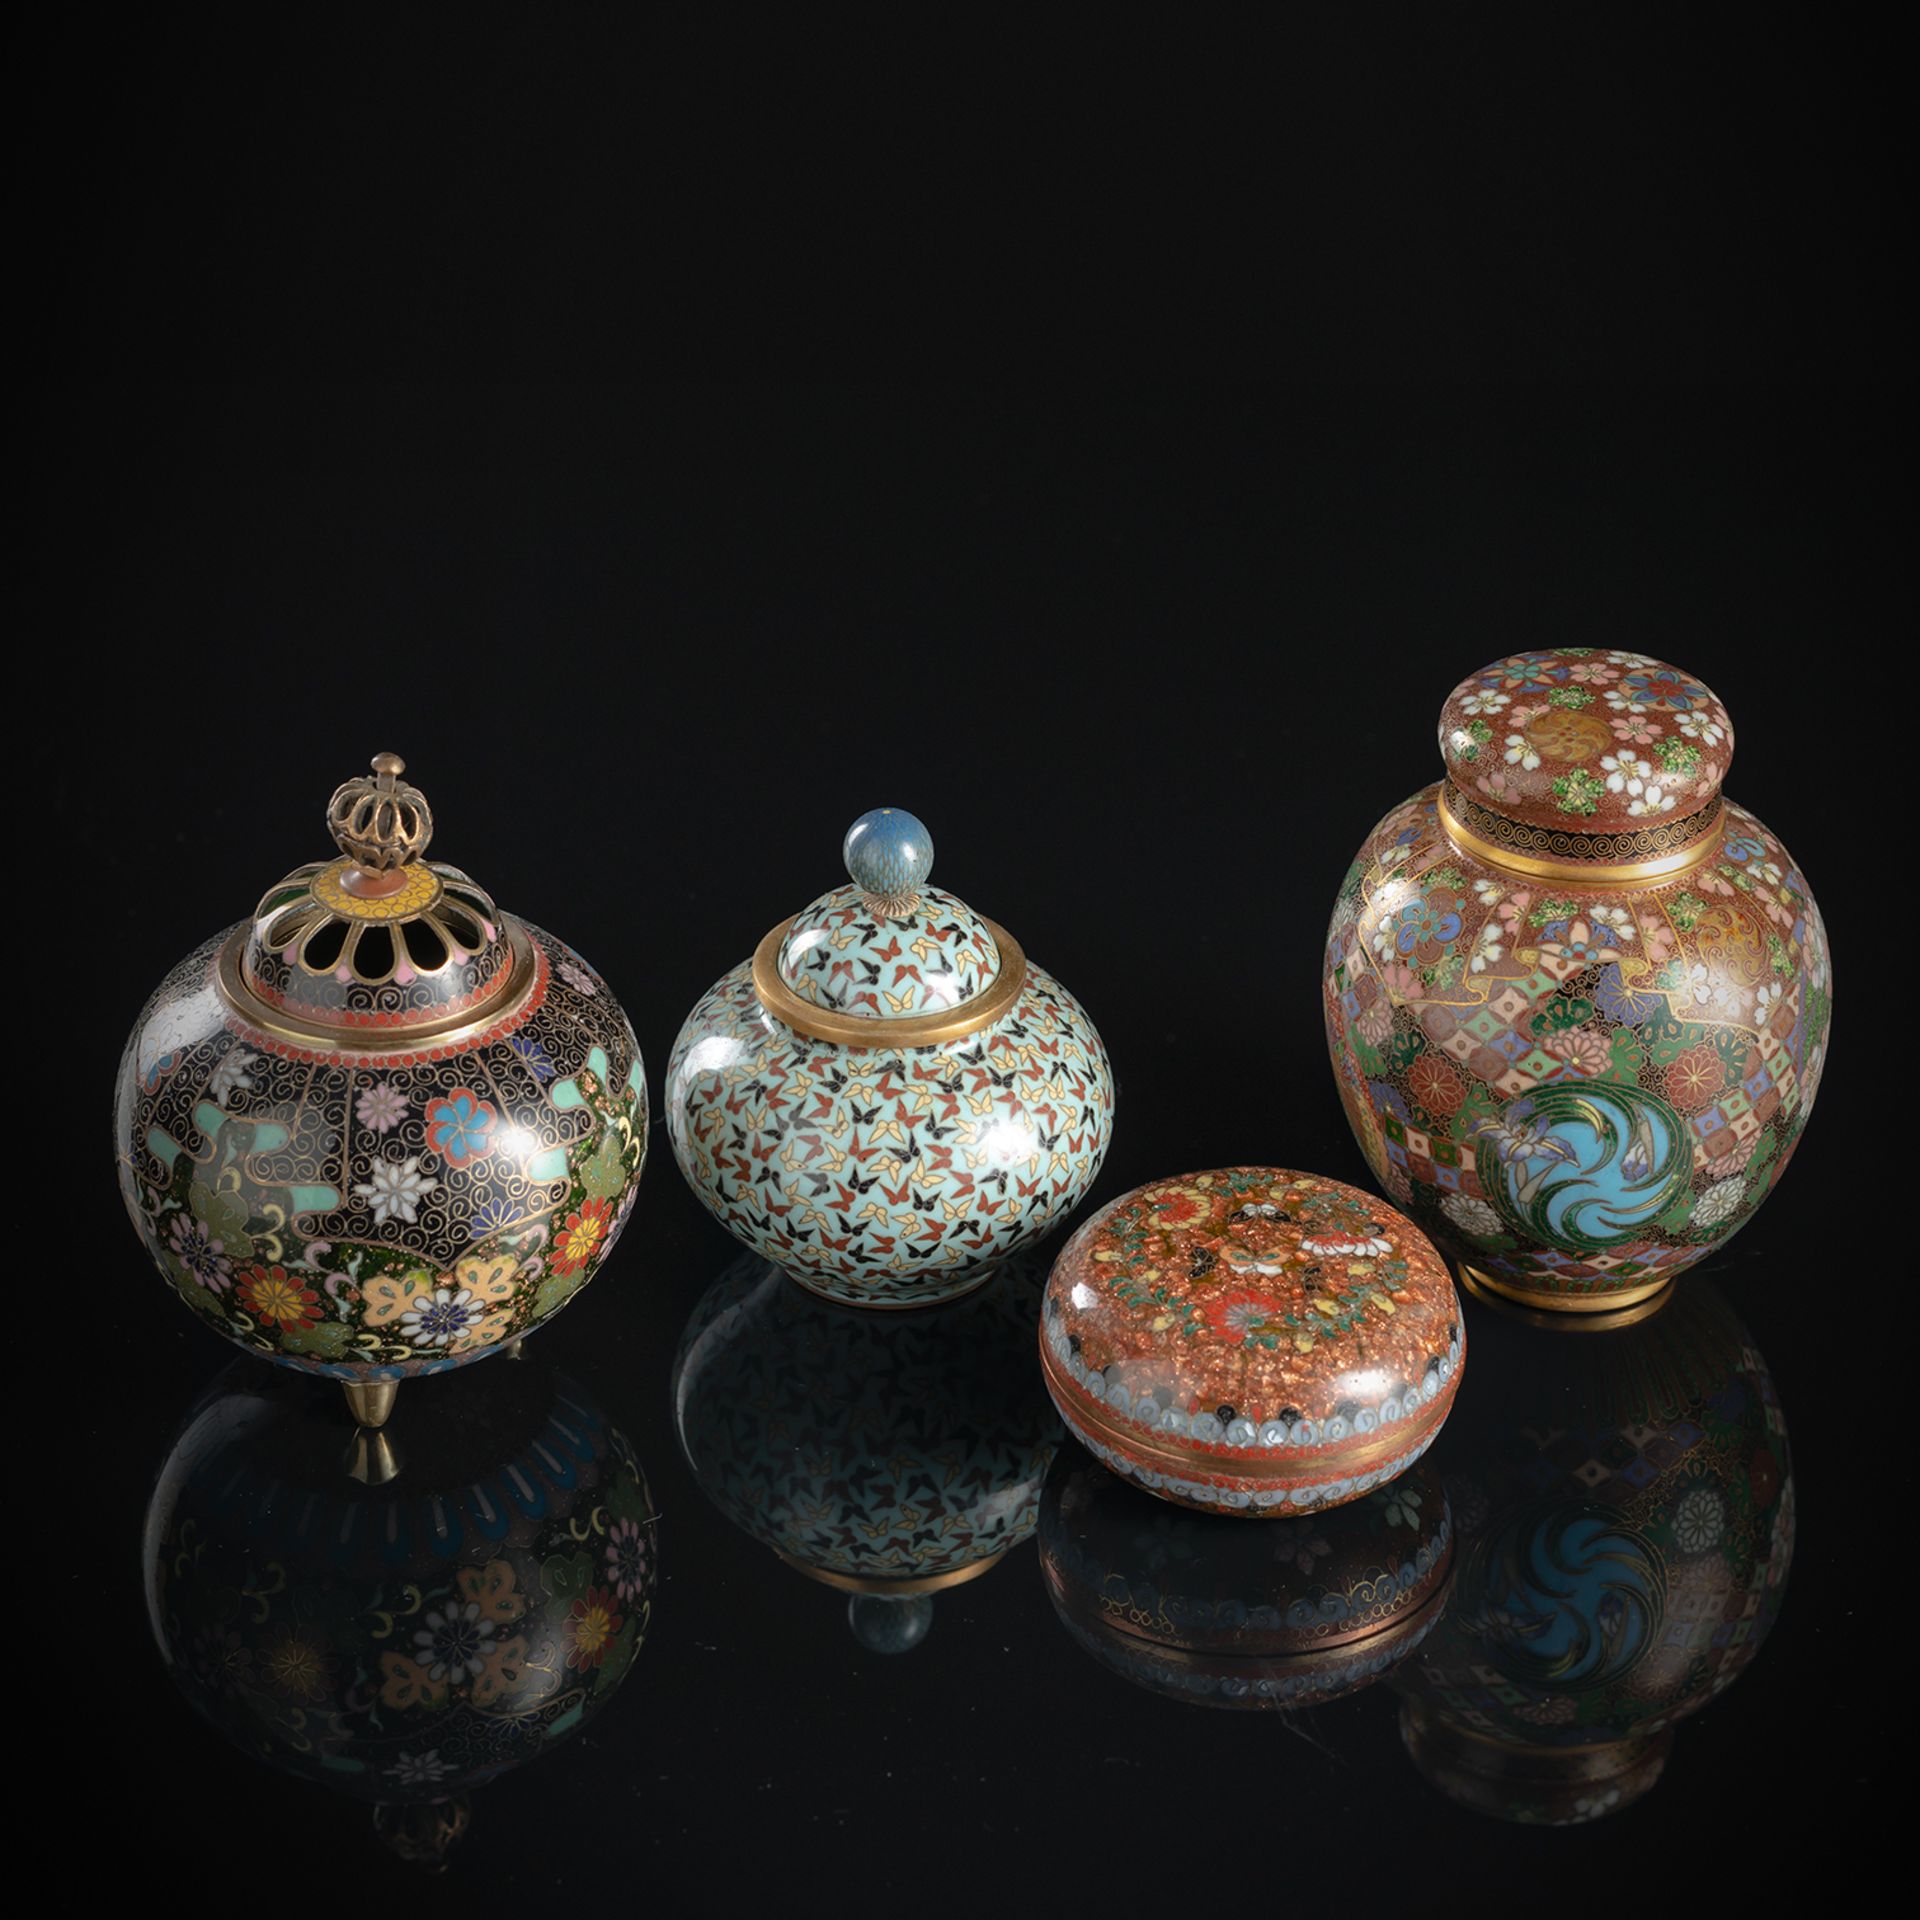 A PAIR OF CLOISONNÉ ENAMEL VASES, A TEA CADDY, A KORO AND TWO BOXES AND COVERS